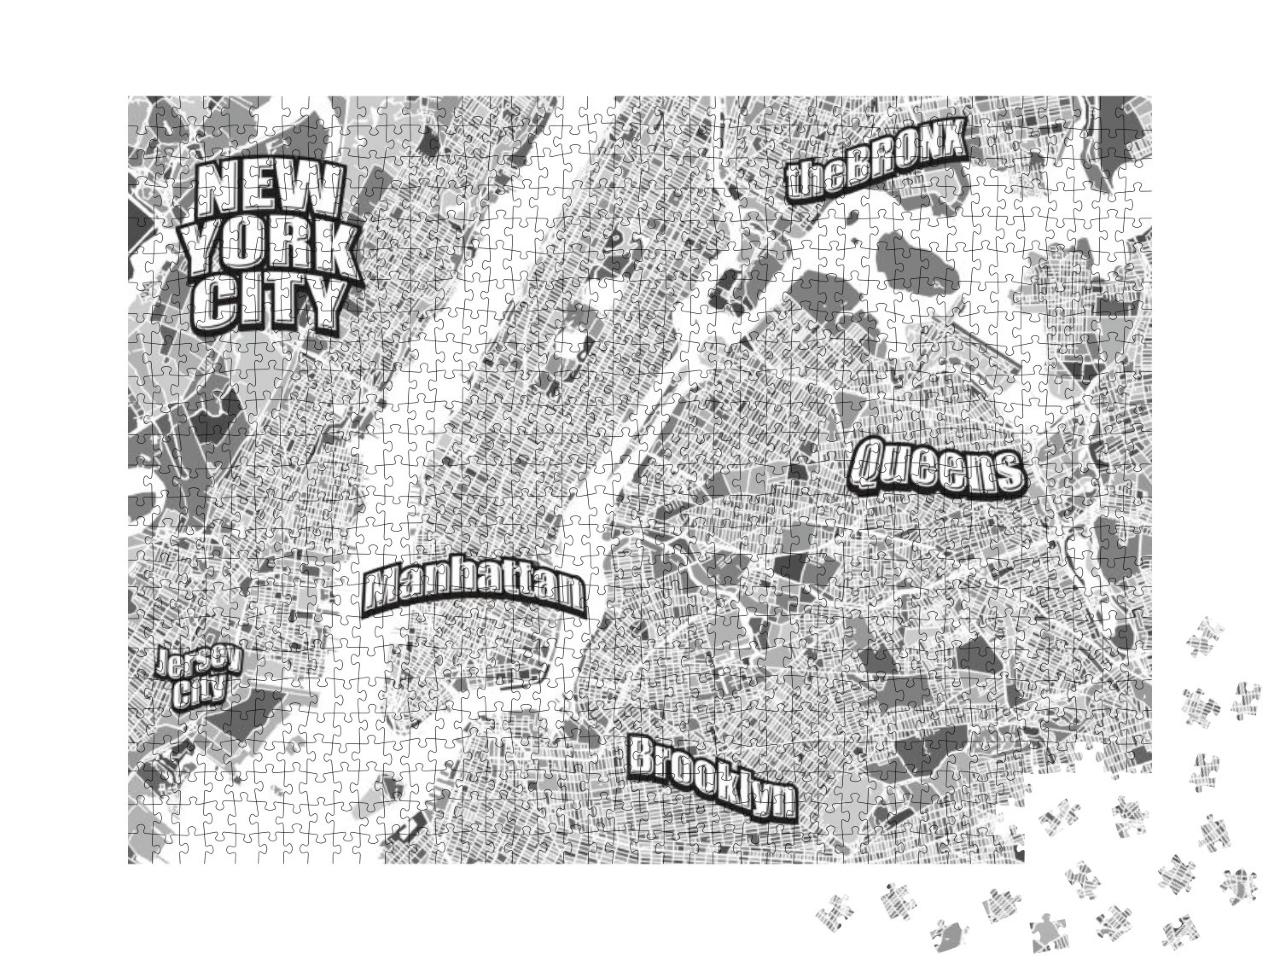 New York City District Map. Very Detailed Version Without... Jigsaw Puzzle with 1000 pieces